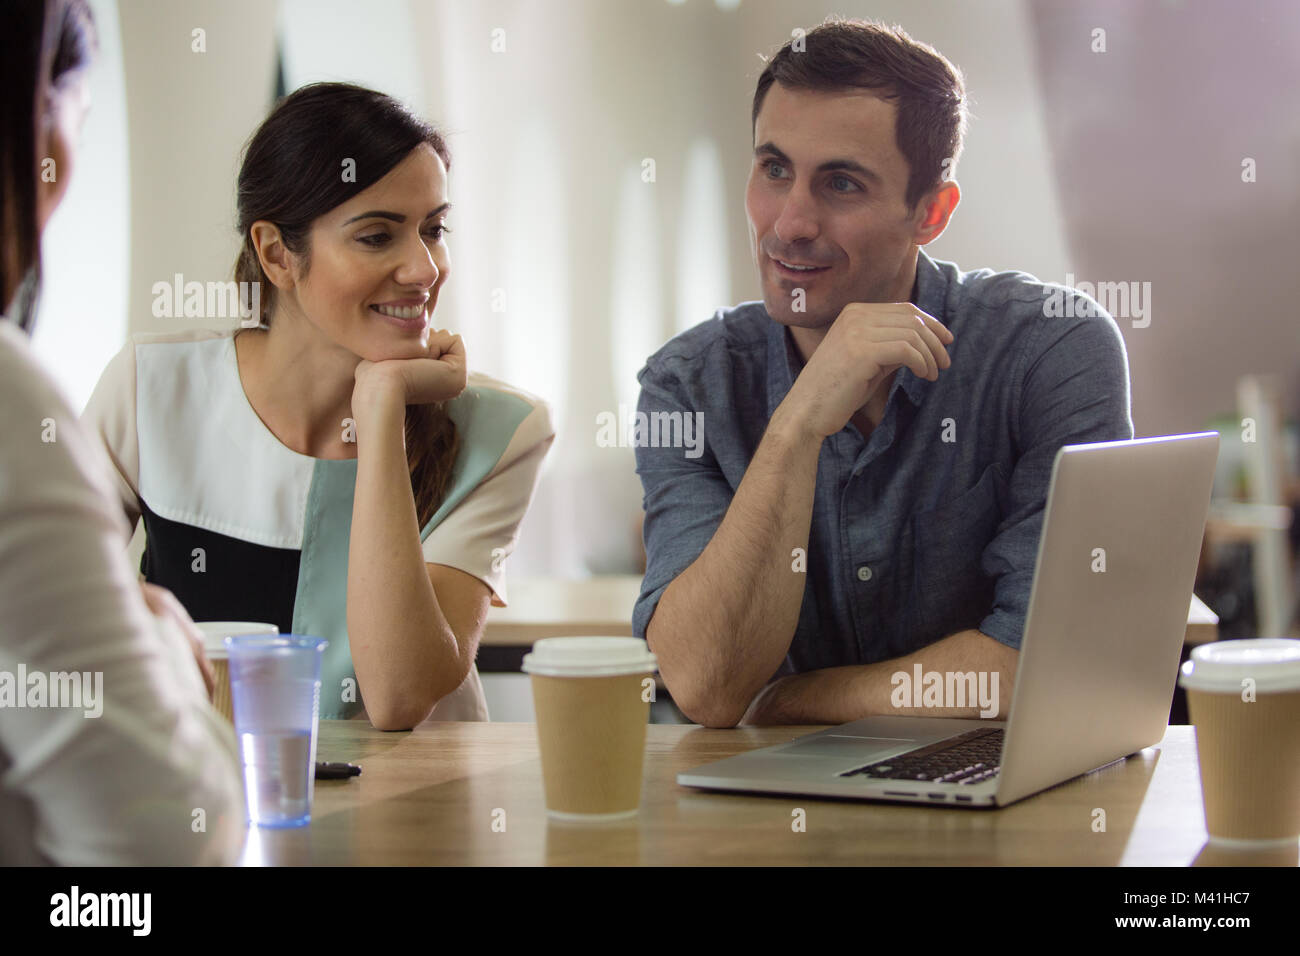 Colleagues in café looking at laptop Stock Photo